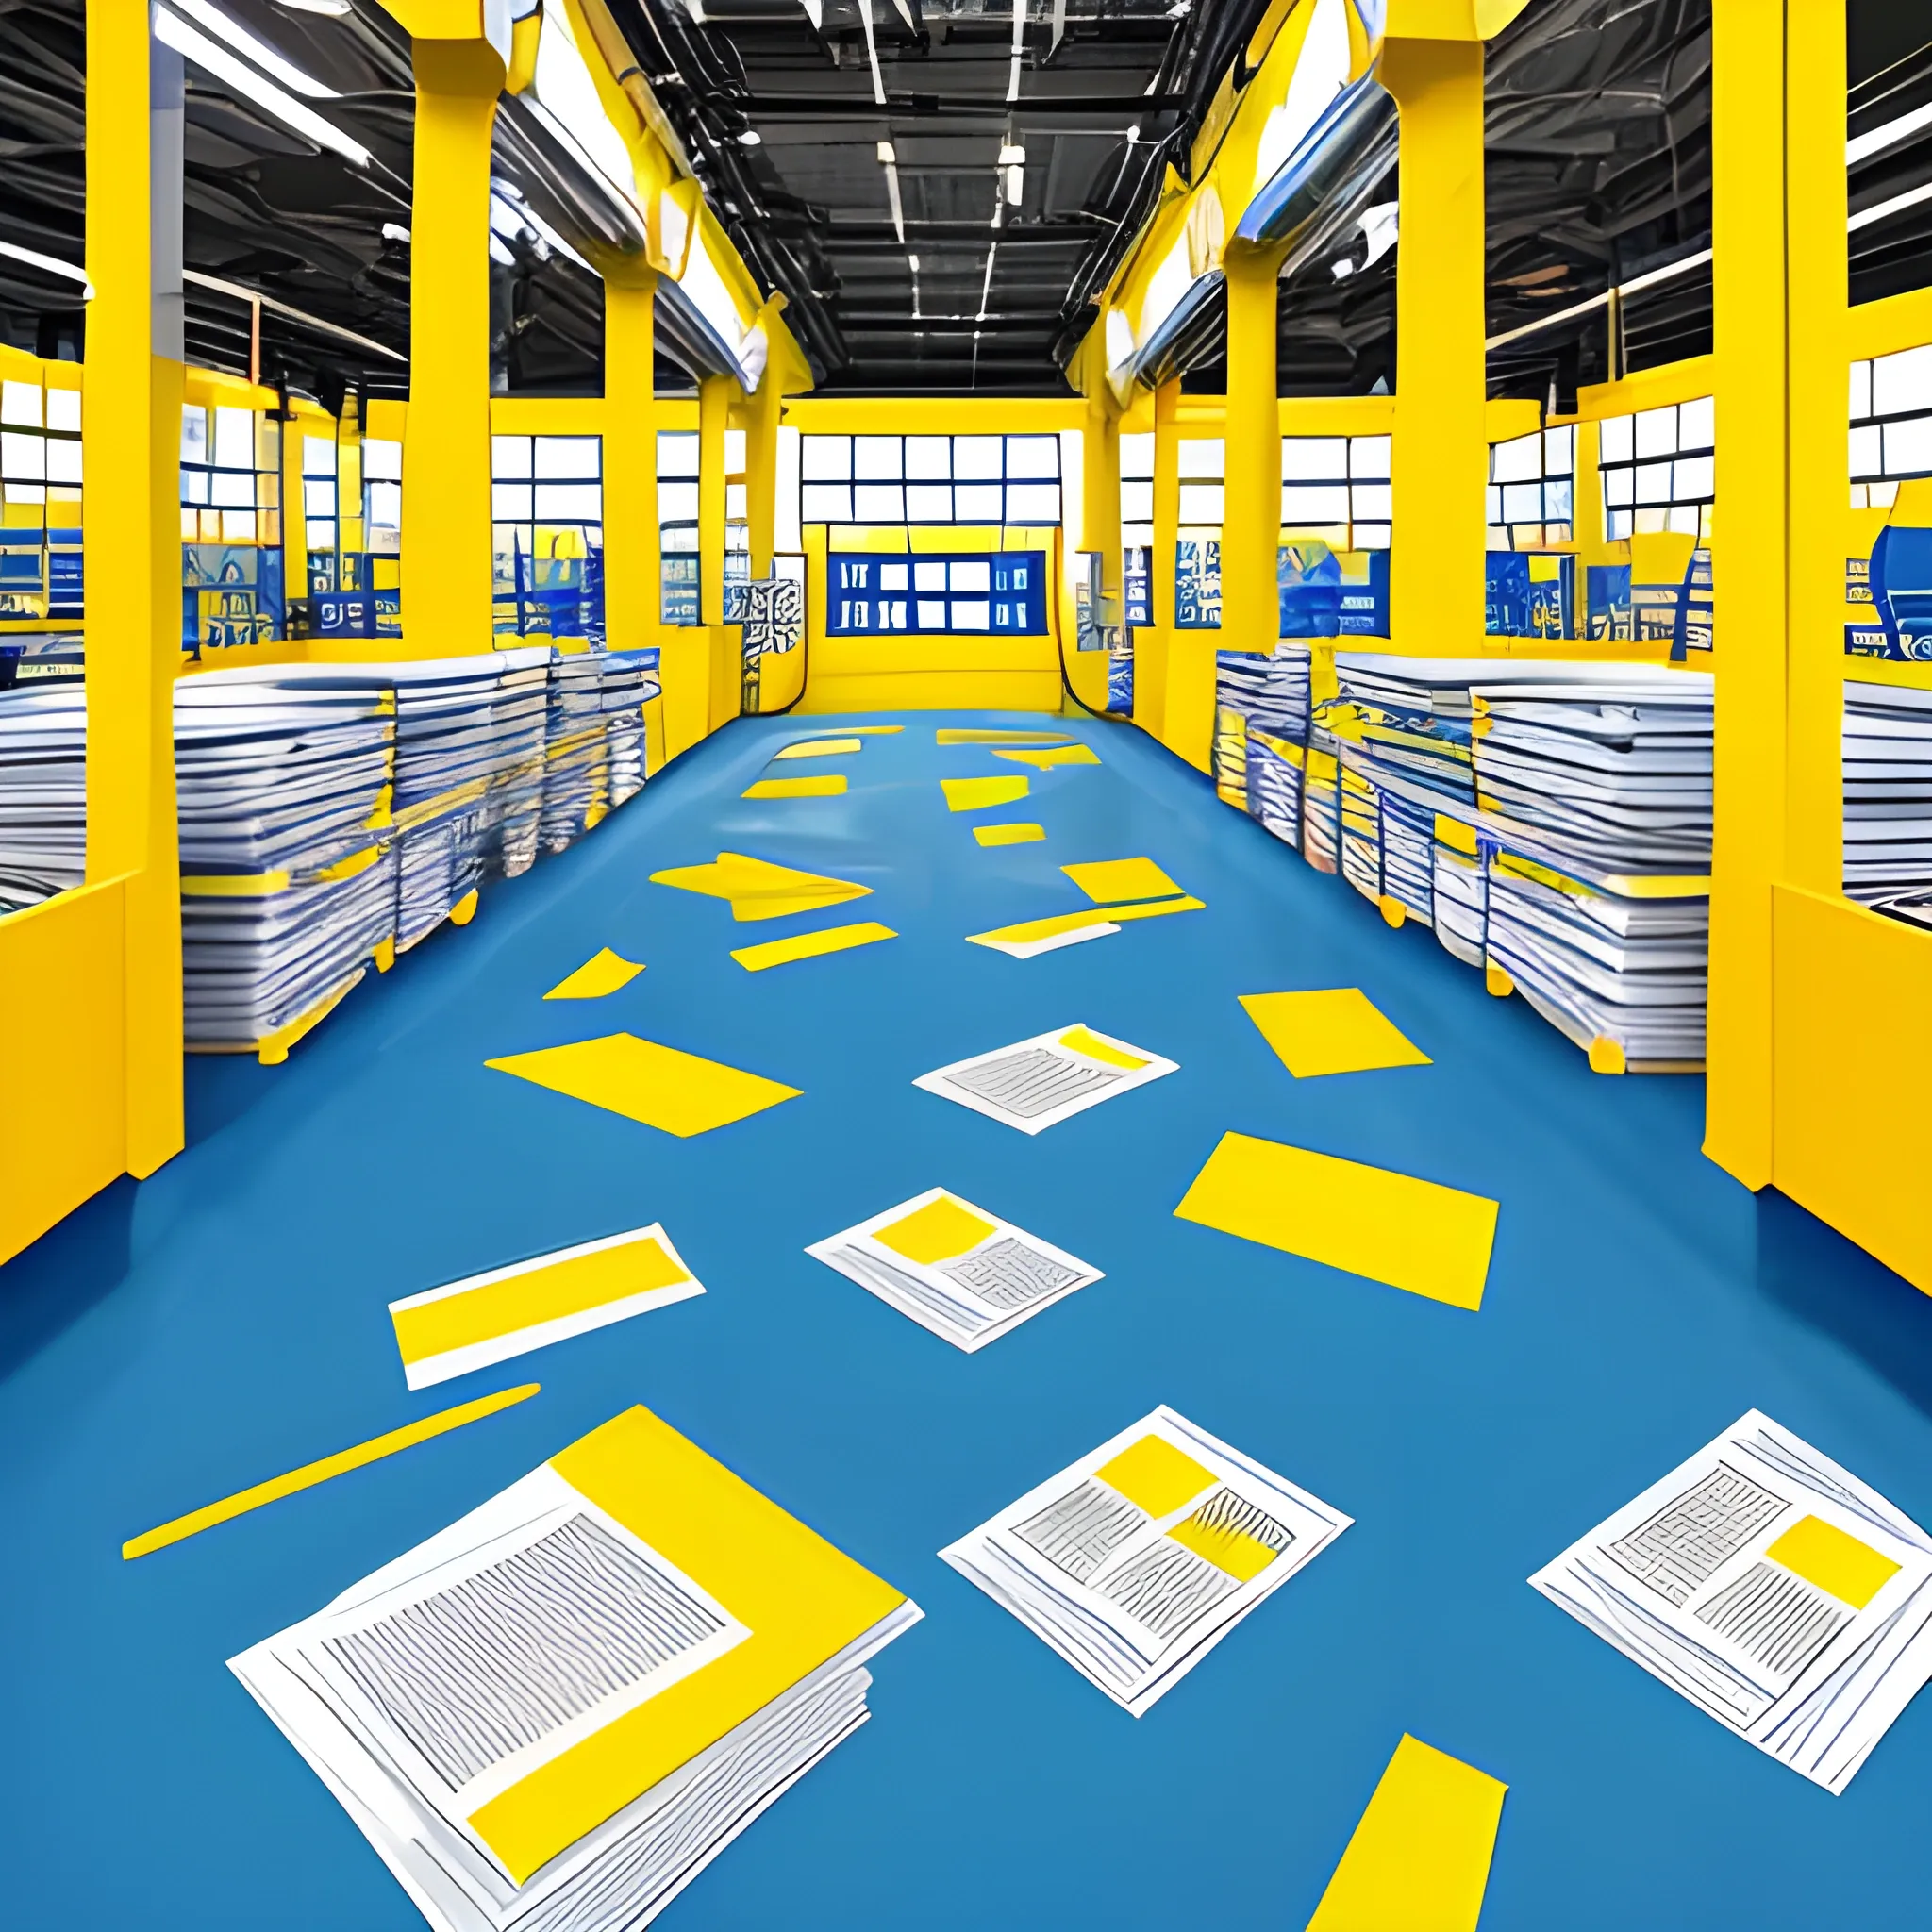 Illustrate a traditional factory floor filled with stacks of paperwork and confused workers, contrasted with a vibrant, organized digital platform where workers are smiling and efficiently managing processes. Use a playful color palette with bright blues and energetic yellows to signify the shift from chaos to order.
